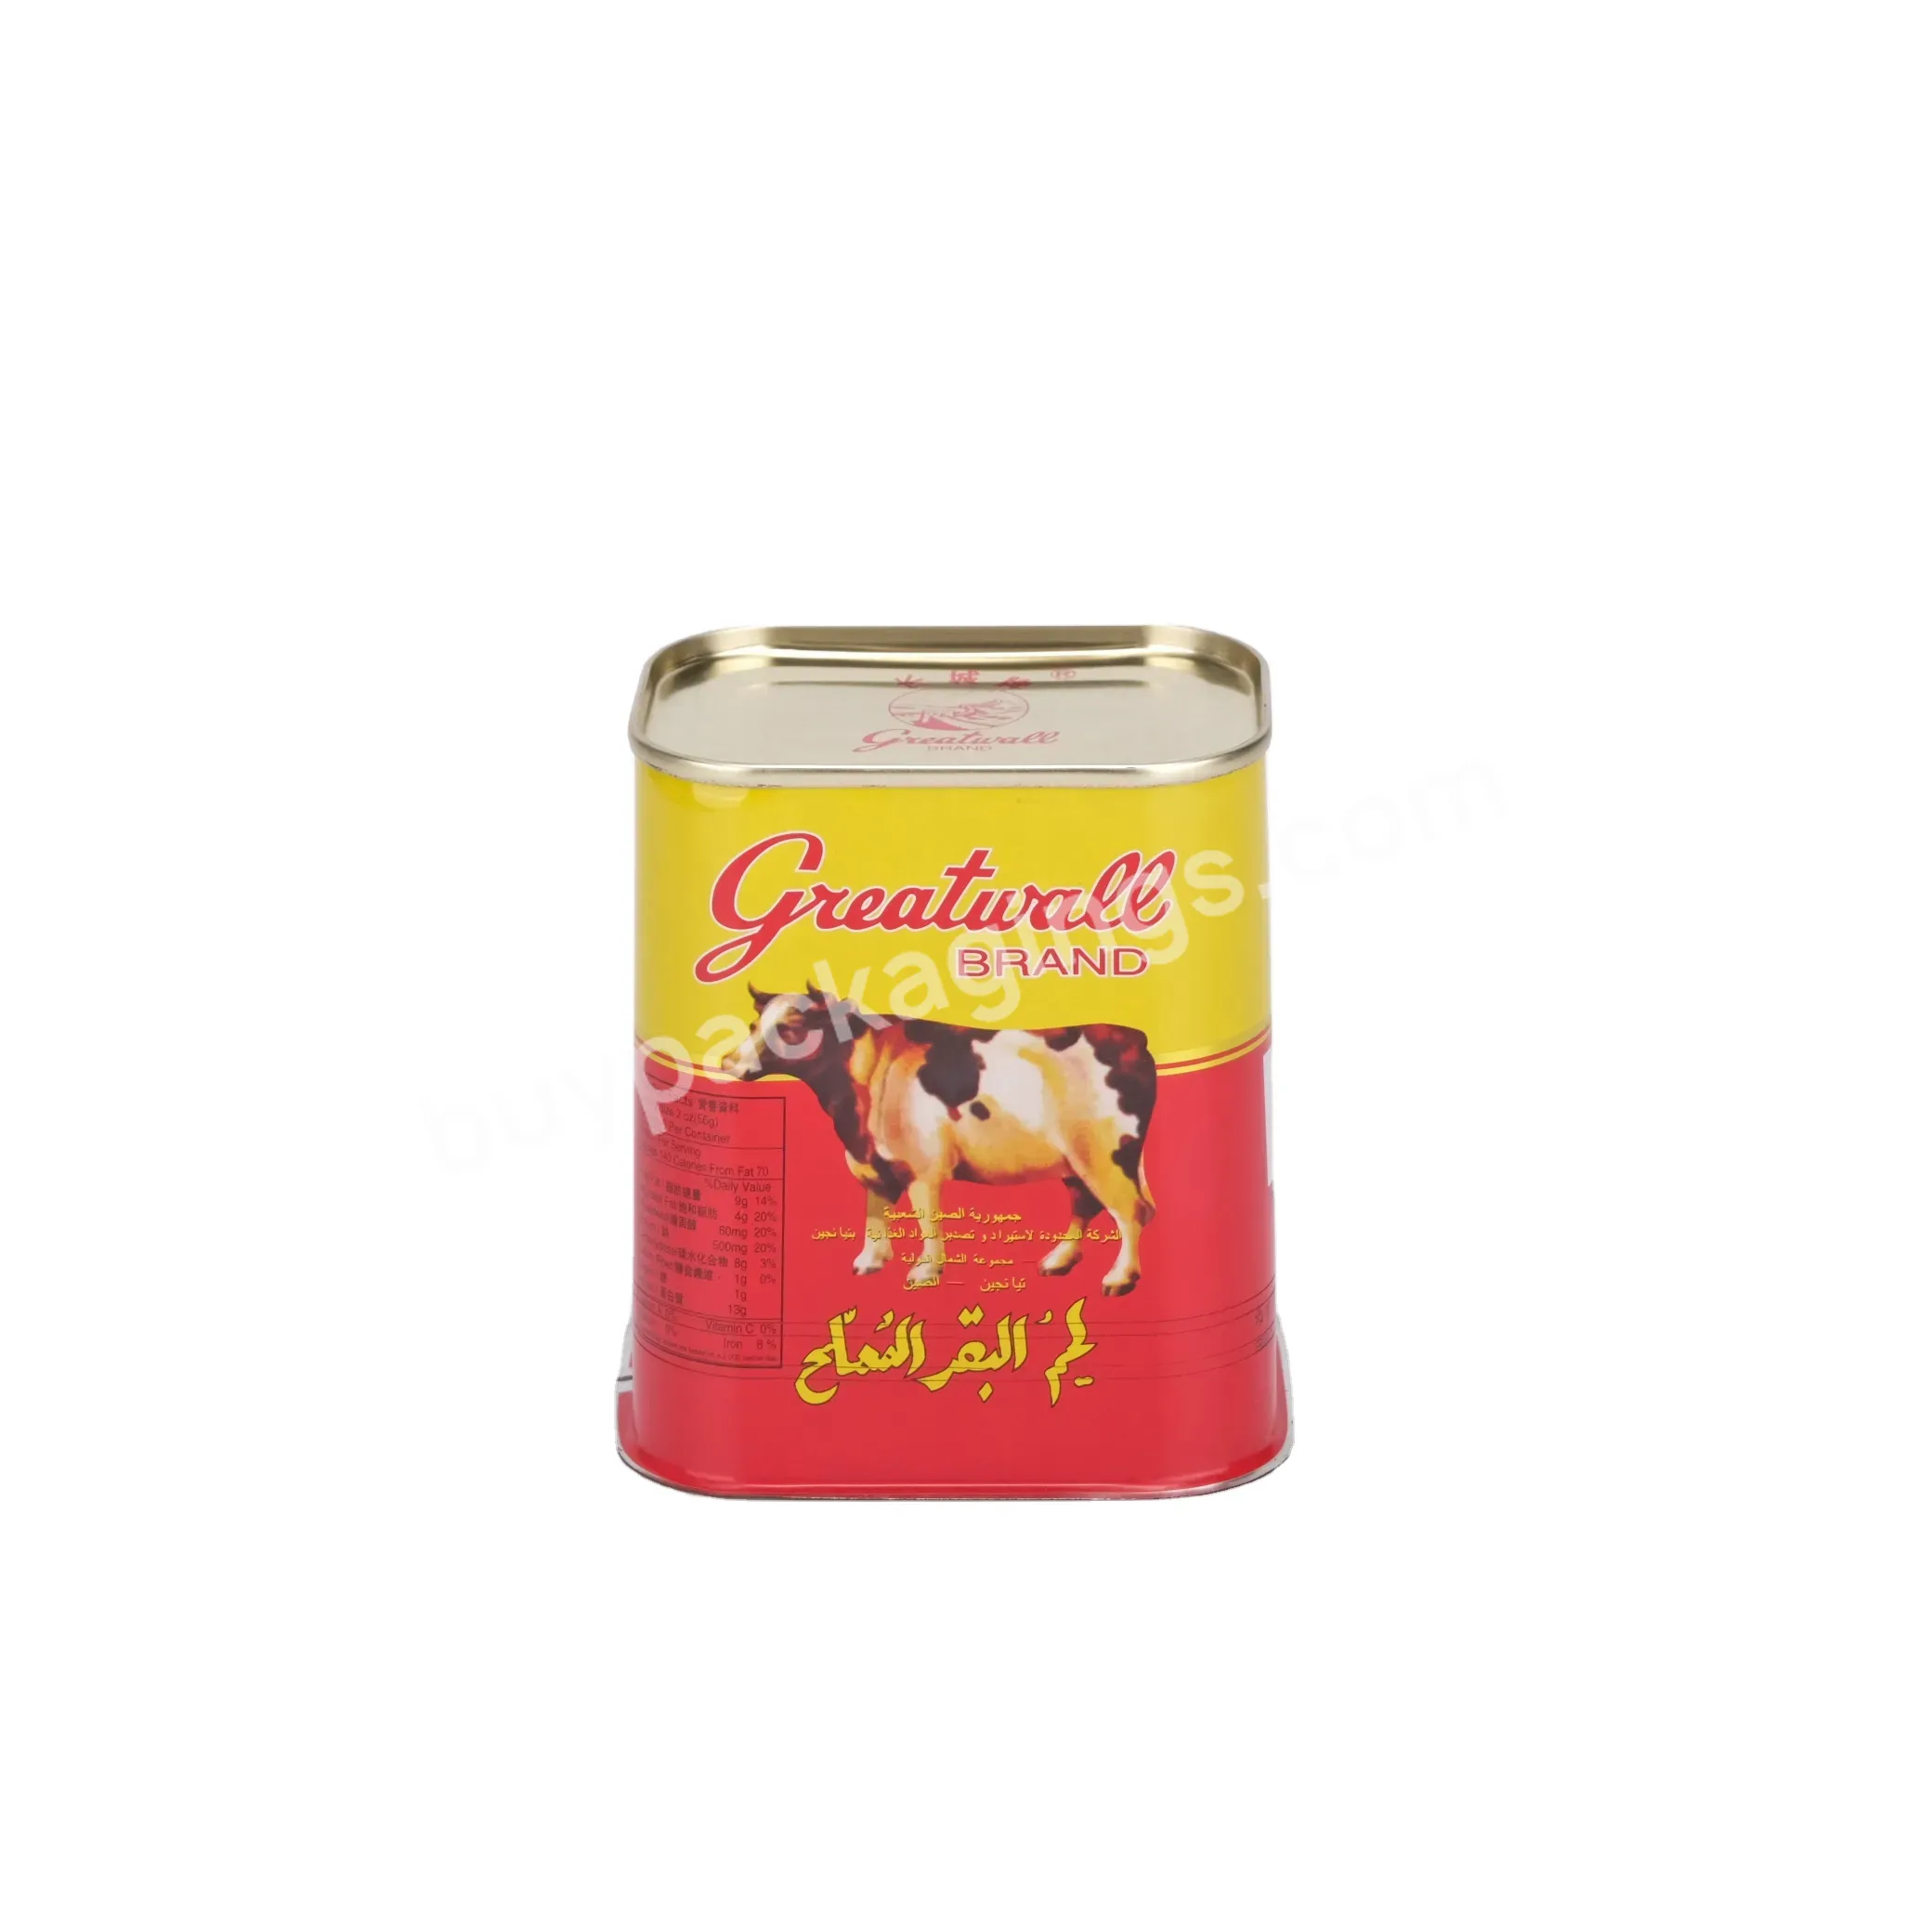 Long Term Storage Portable Canned Beef Meat Packaging Square Food Tin Can - Buy Square Metal Tin Can,Tin Can With Easy Open Lid,Canned Meat Storage Metal Can.